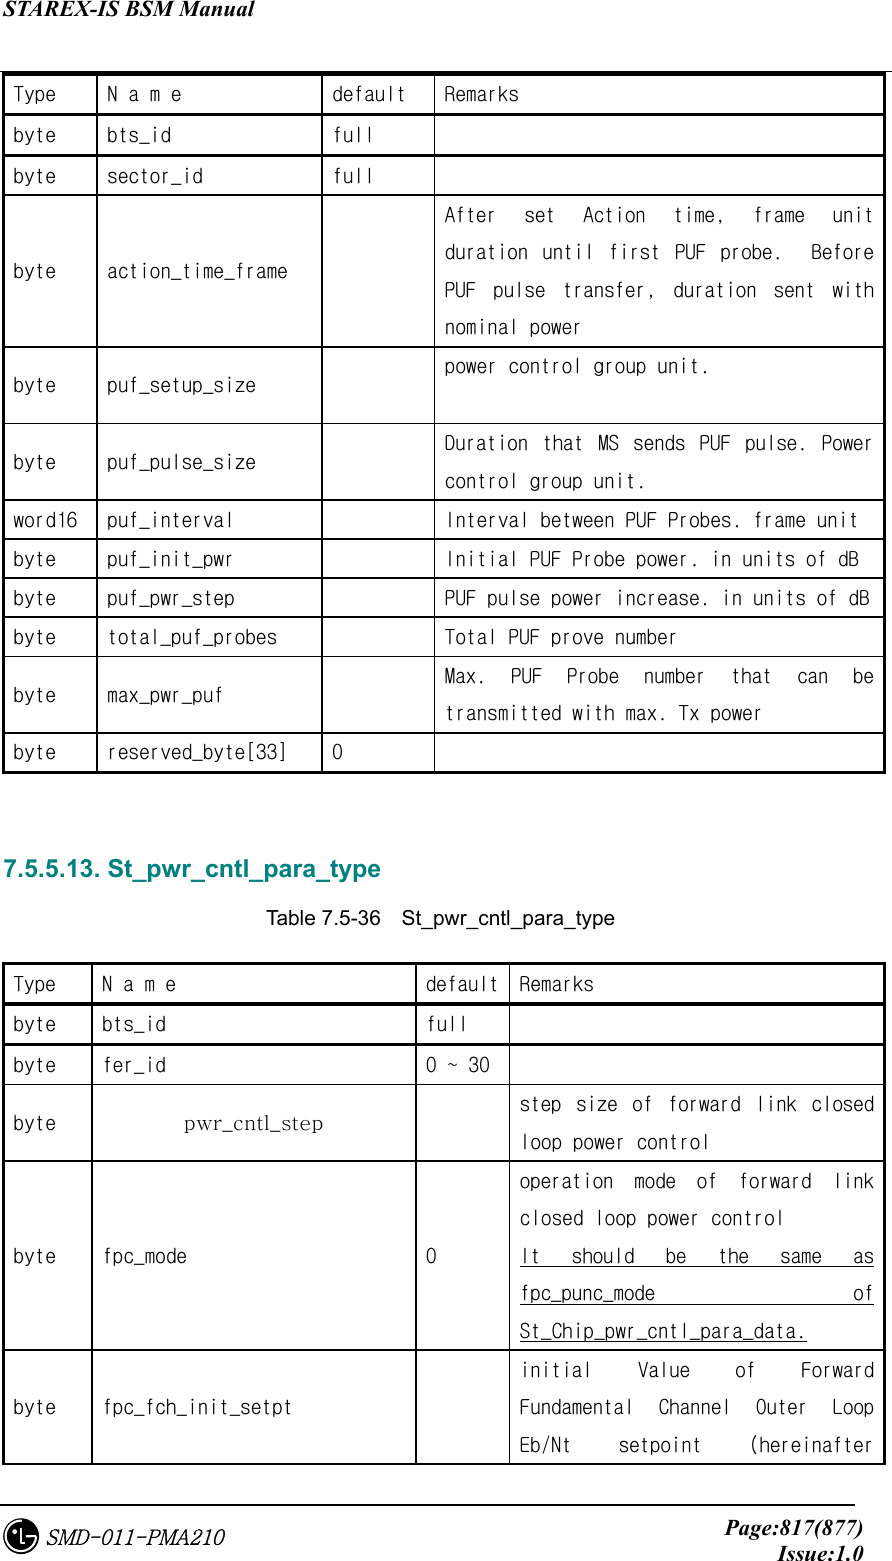 STAREX-IS BSM Manual     Page:817(877)Issue:1.0SMD-011-PMA210 Type  N a m e  default  Remarks  byte  bts_id  full   byte  sector_id  full   byte  action_time_frame   After  set  Action  time,  frame  unit duration  until  first  PUF  probe.    Before PUF  pulse  transfer,  duration  sent  with nominal power byte  puf_setup_size    power control group unit. byte  puf_pulse_size    Duration  that  MS  sends  PUF  pulse.  Power control group unit. word16  puf_interval    Interval between PUF Probes. frame unit byte  puf_init_pwr    Initial PUF Probe power. in units of dB byte  puf_pwr_step    PUF pulse power increase. in units of dB byte  total_puf_probes    Total PUF prove number  byte  max_pwr_puf    Max.  PUF  Probe  number  that  can  be transmitted with max. Tx power byte  reserved_byte[33]  0     7.5.5.13. St_pwr_cntl_para_type Table 7.5-36  St_pwr_cntl_para_type Type  N a m e  default  Remarks  byte  bts_id  full   byte  fer_id  0 ~ 30   byte  pwr_cntl_step   step  size  of  forward  link  closed loop power control  byte  fpc_mode  0 operation  mode  of  forward  link closed loop power control  It  should  be  the  same  as fpc_punc_mode  of St_Chip_pwr_cntl_para_data. byte  fpc_fch_init_setpt   initial  Value  of  Forward Fundamental  Channel  Outer  Loop Eb/Nt  setpoint  (hereinafter 